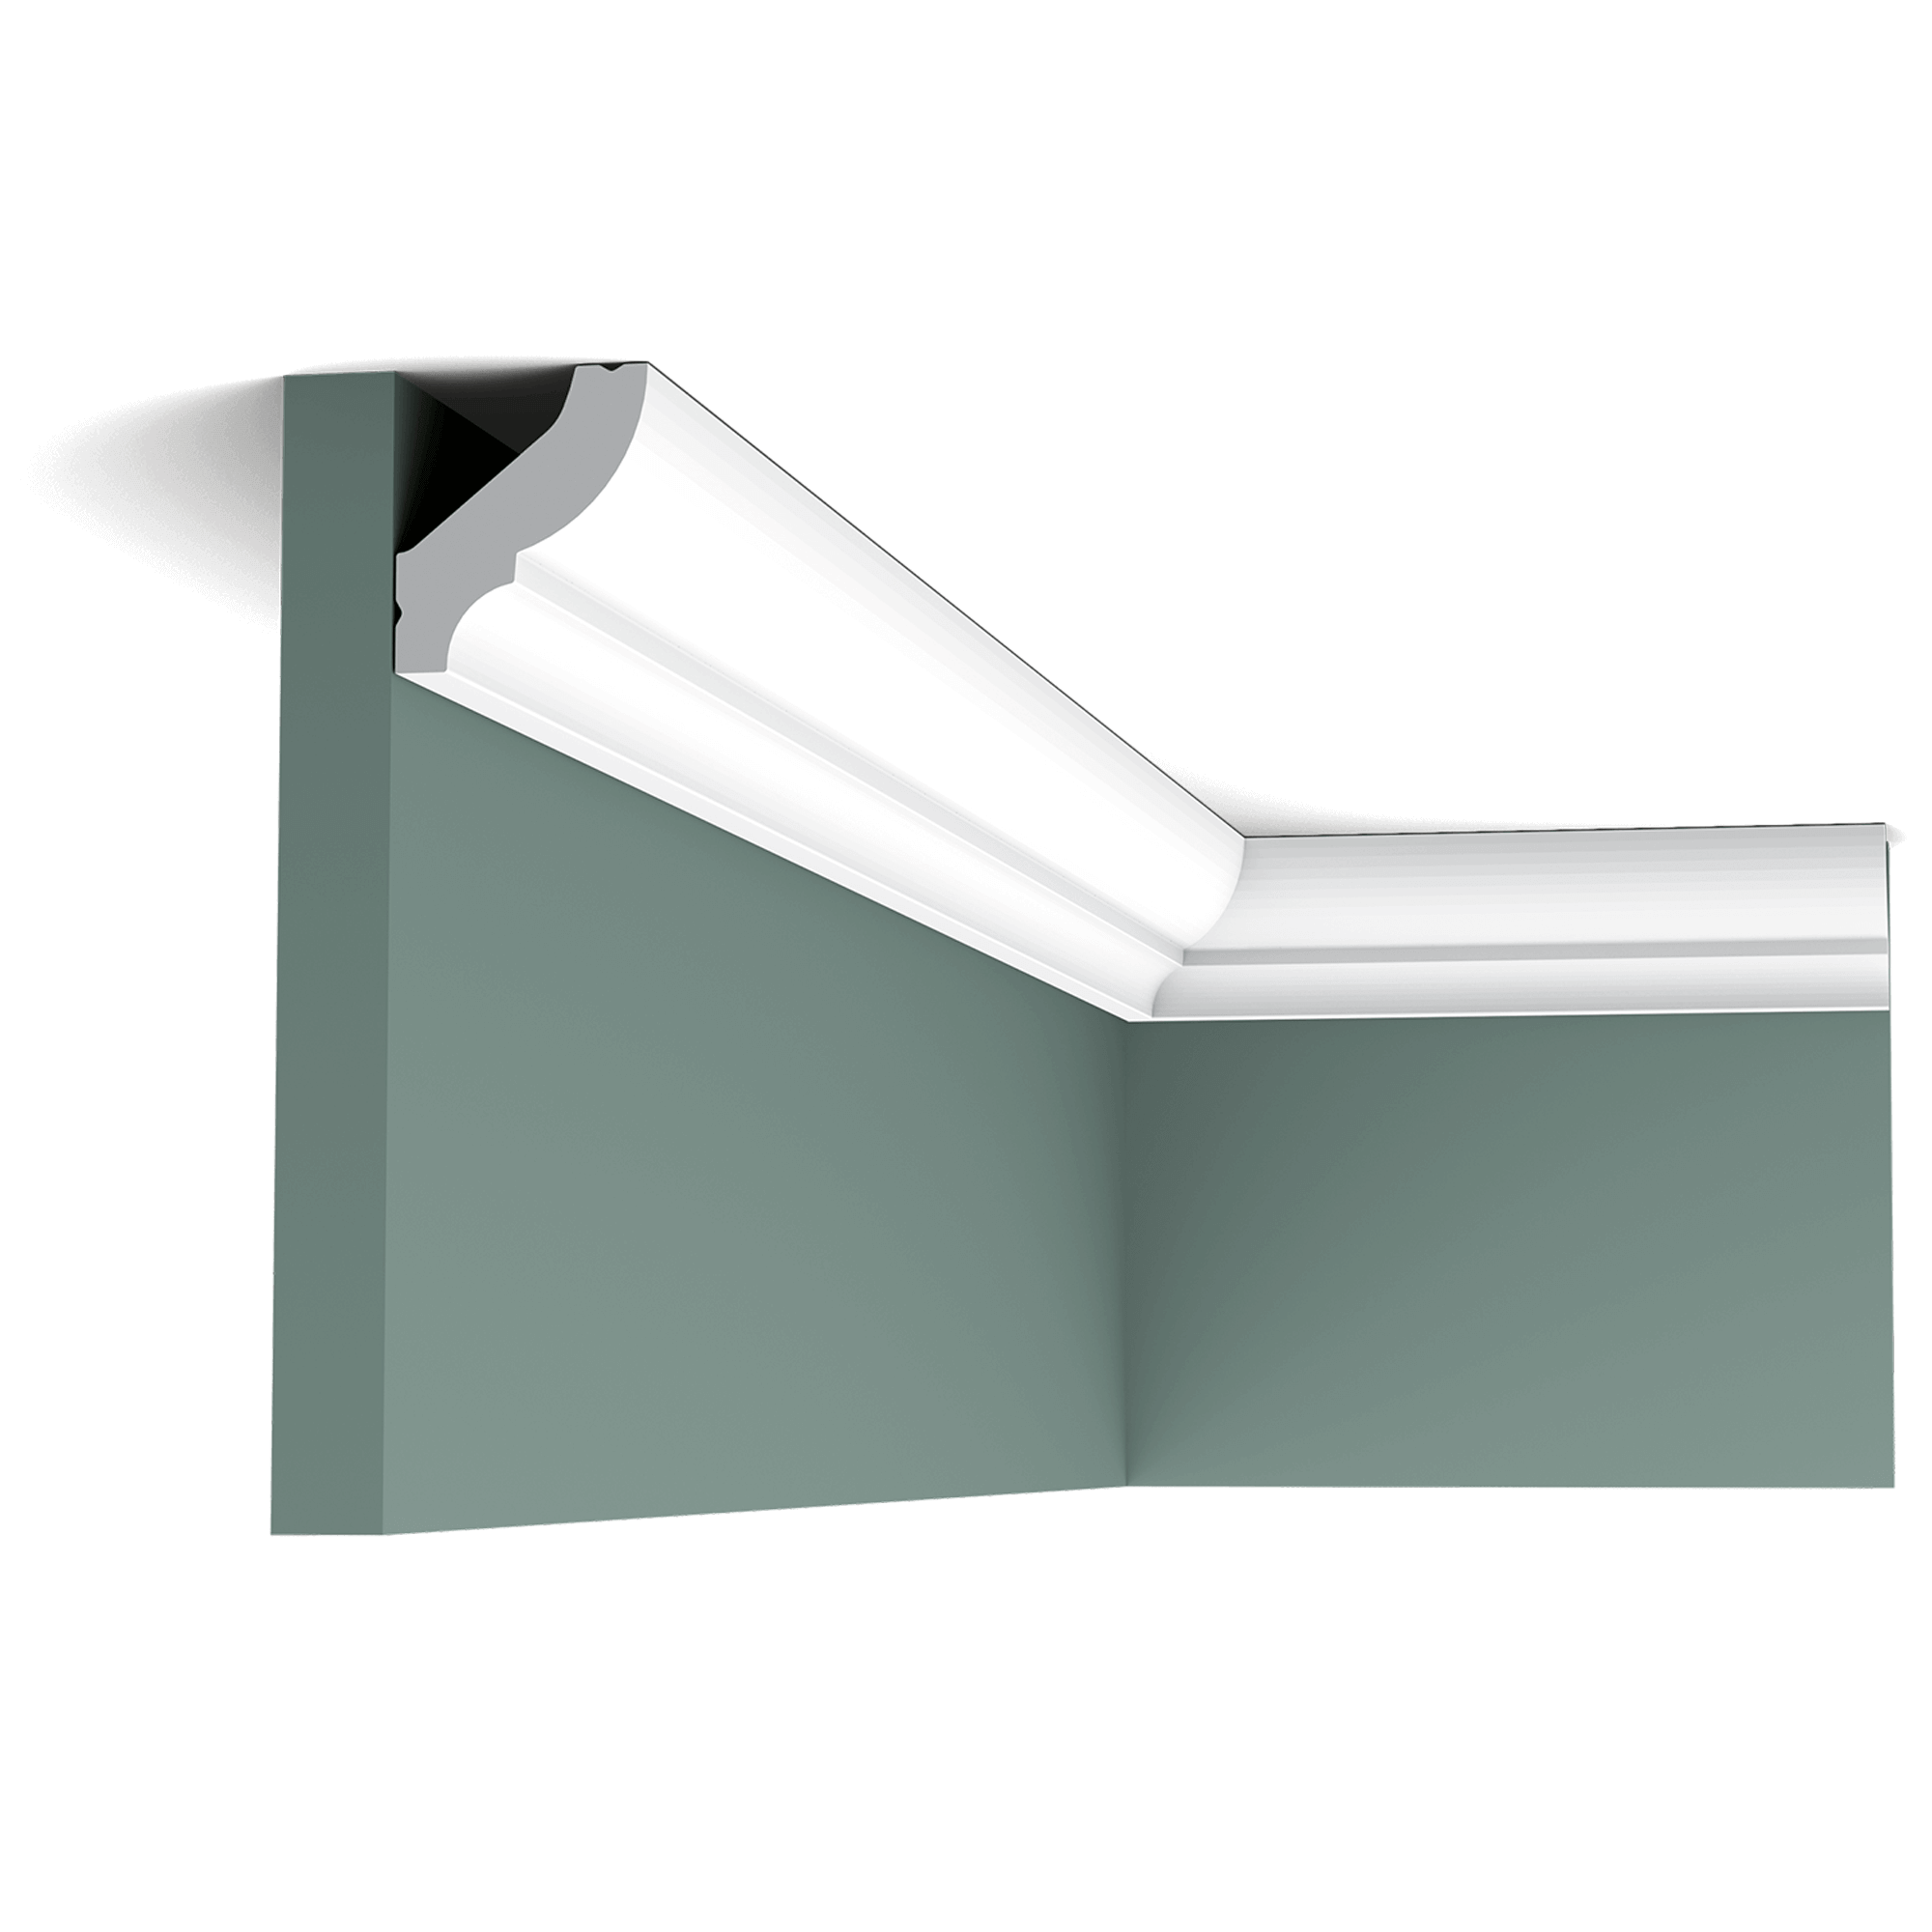 cb501 cornice moulding cc2a Simple basic profile with graceful curves. Fits any decorating style seamlessly.